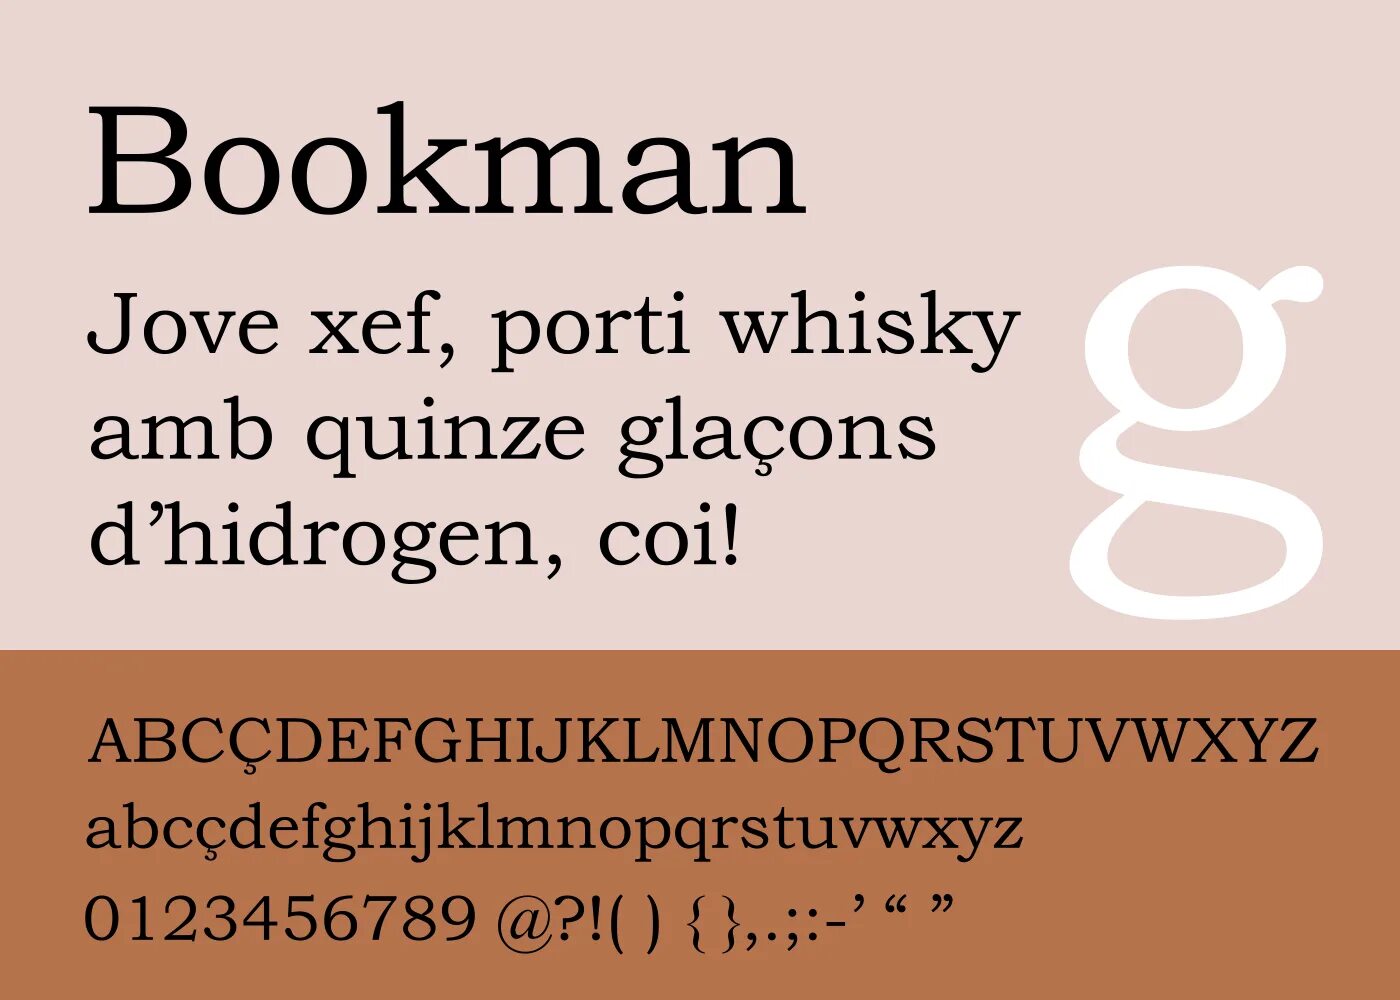 Bookman. Monotype Bookman old. Bookman old Style. Букмэн. Шрифт bookman old